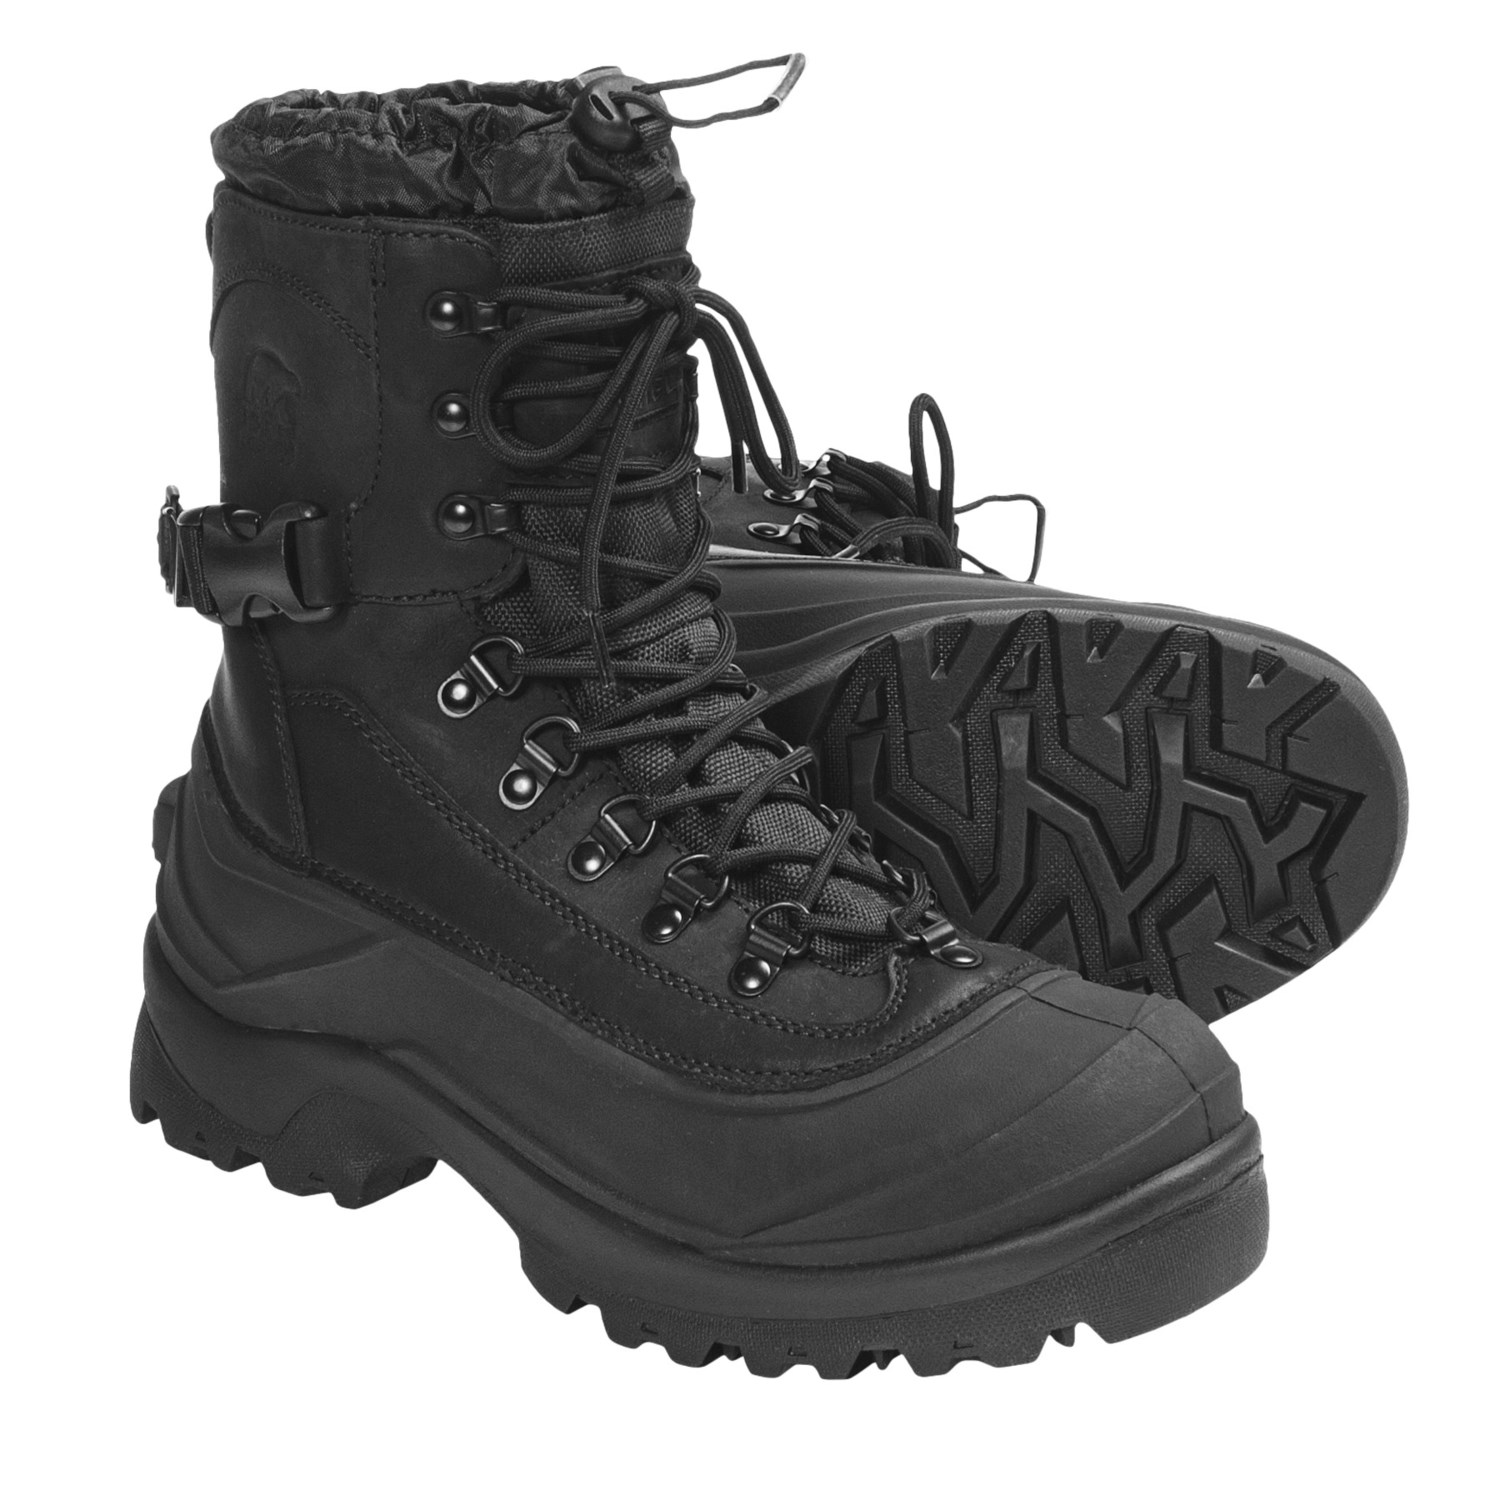 Sorel -40°F Conquest Winter Boots - Waterproof Thinsulate® Ultra (For Men)